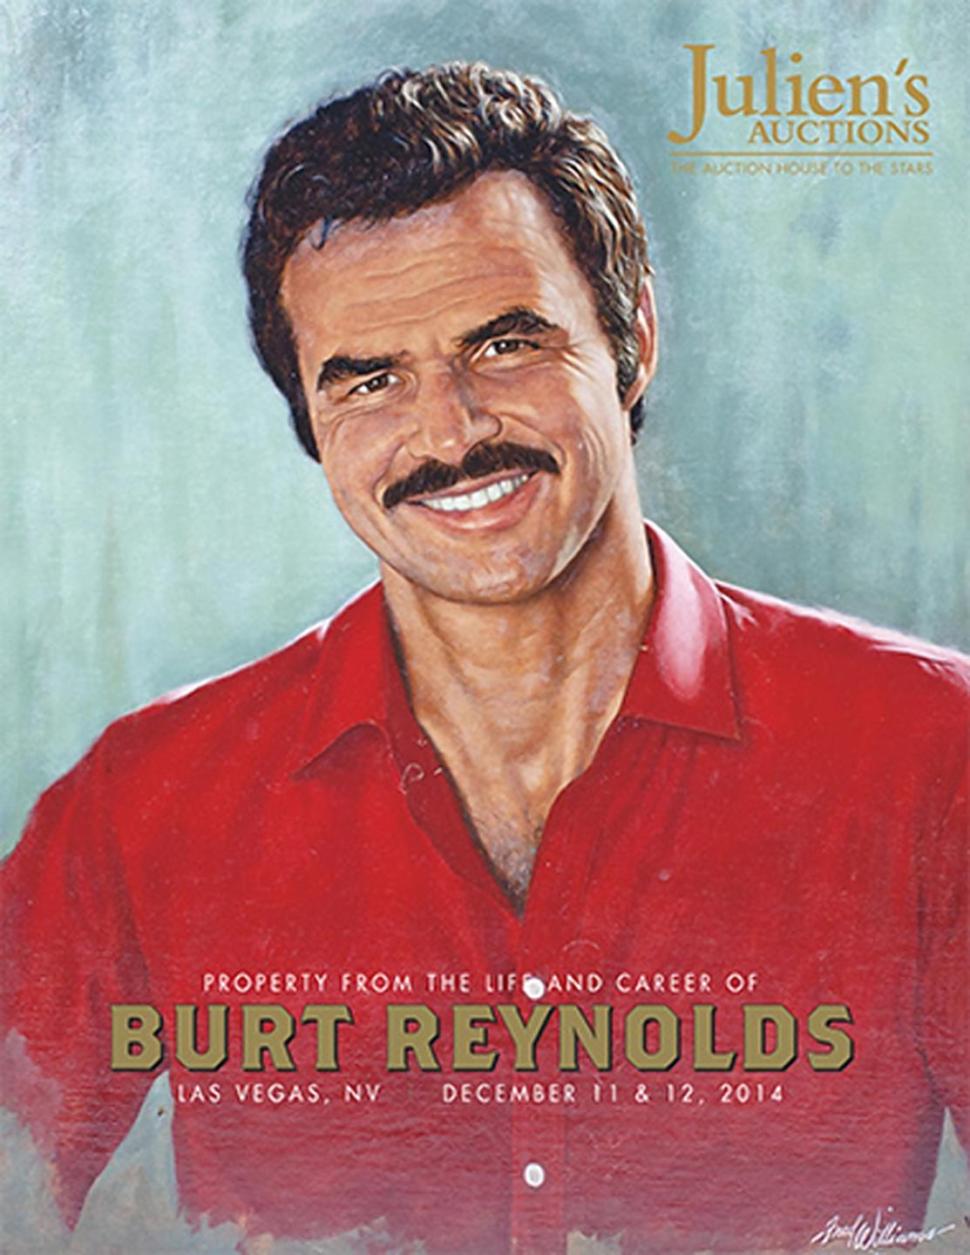 Burt Reynolds’ auction is set for Dec. 11 and 12 at the trendy Palms Casino Resort in Las Vegas.